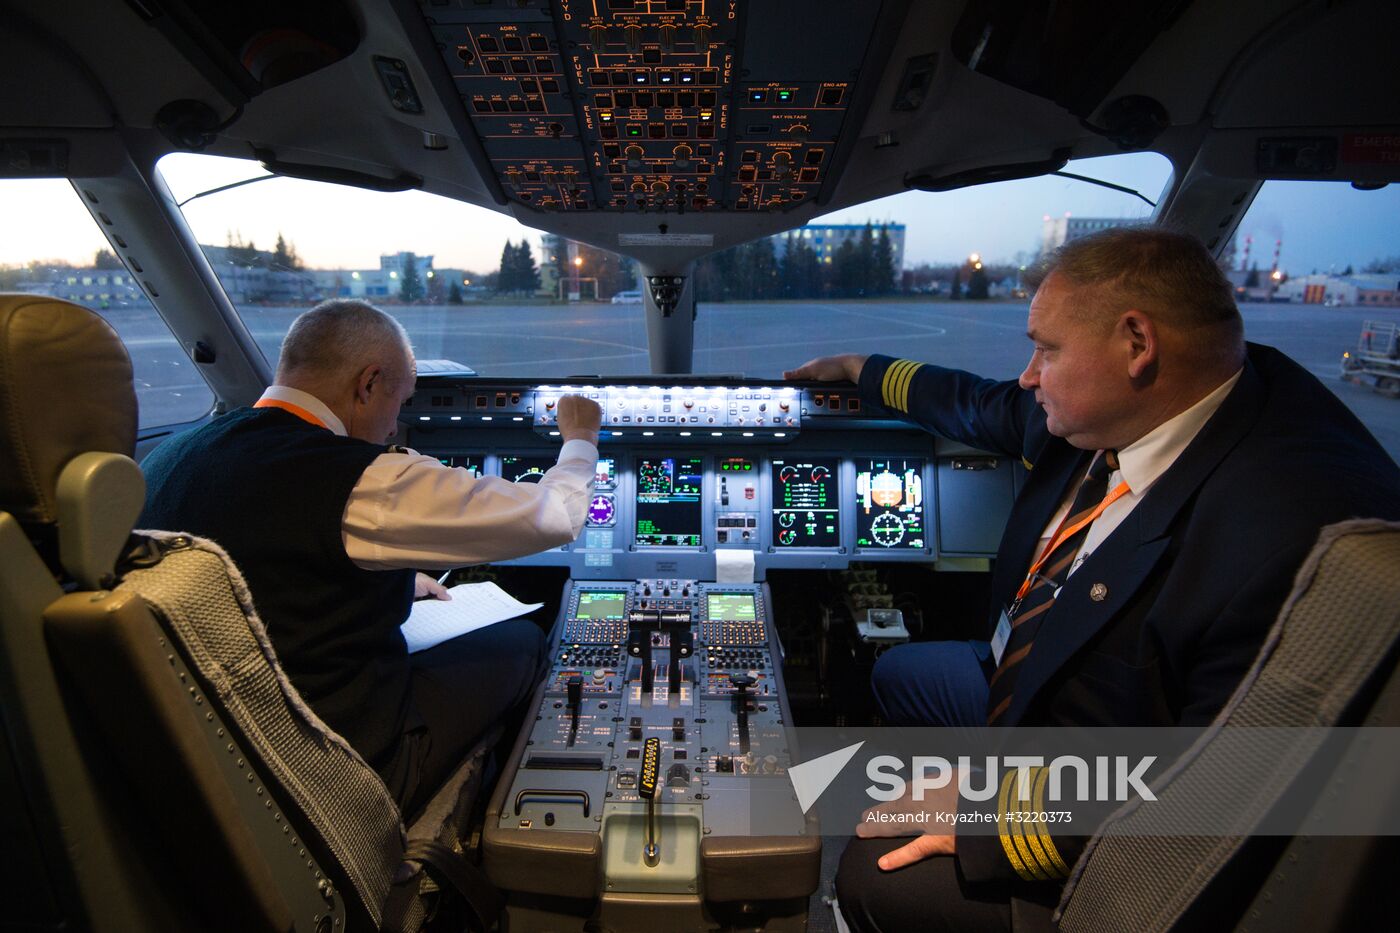 Azimut Airlines' first flight from Novosibirsk